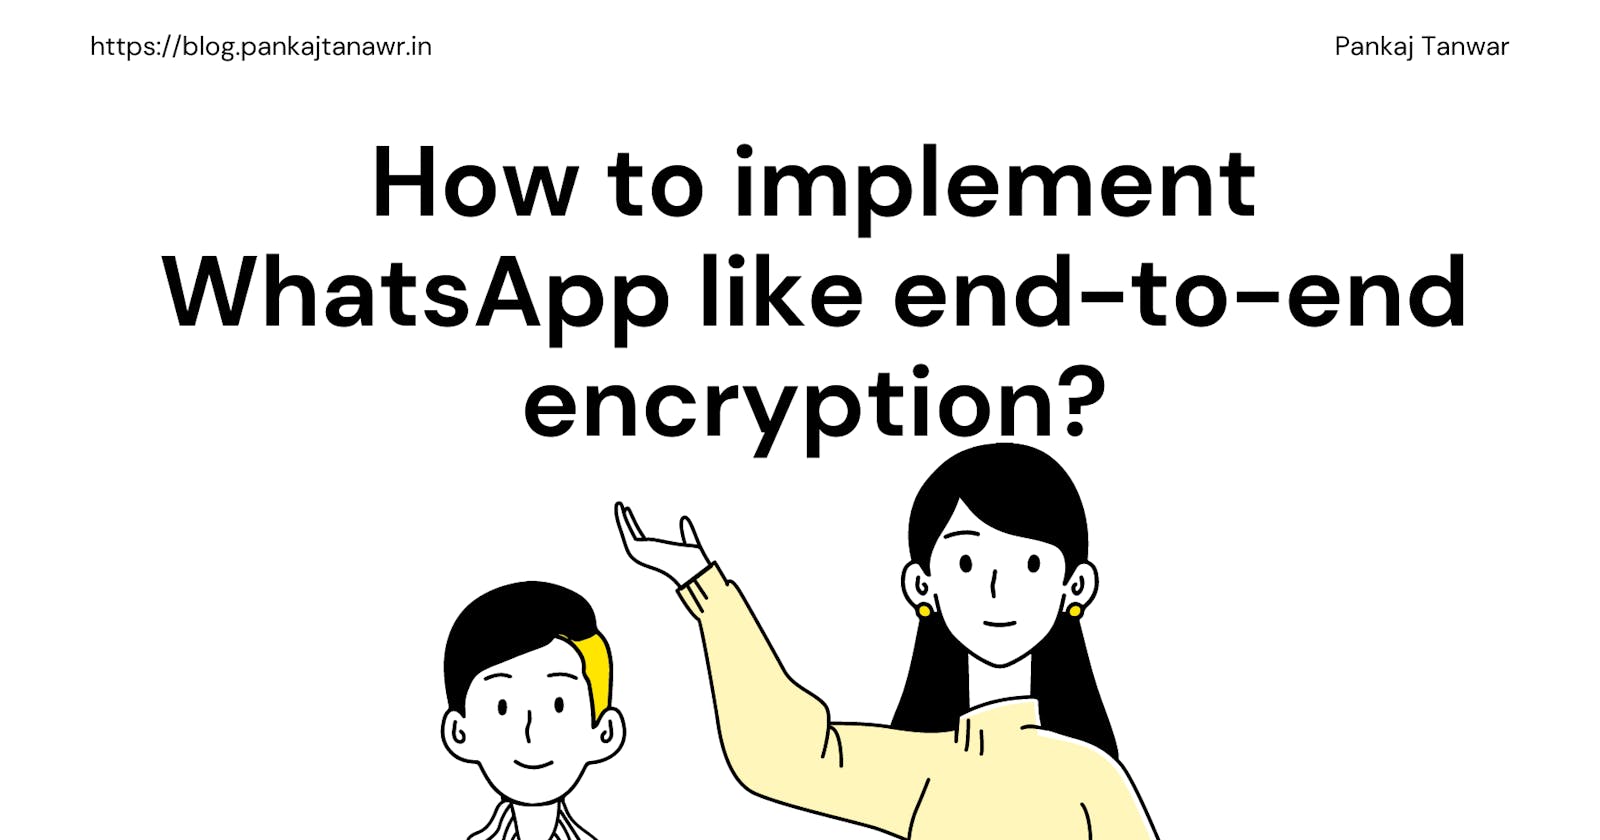 How to implement WhatsApp like End-to-end encryption?